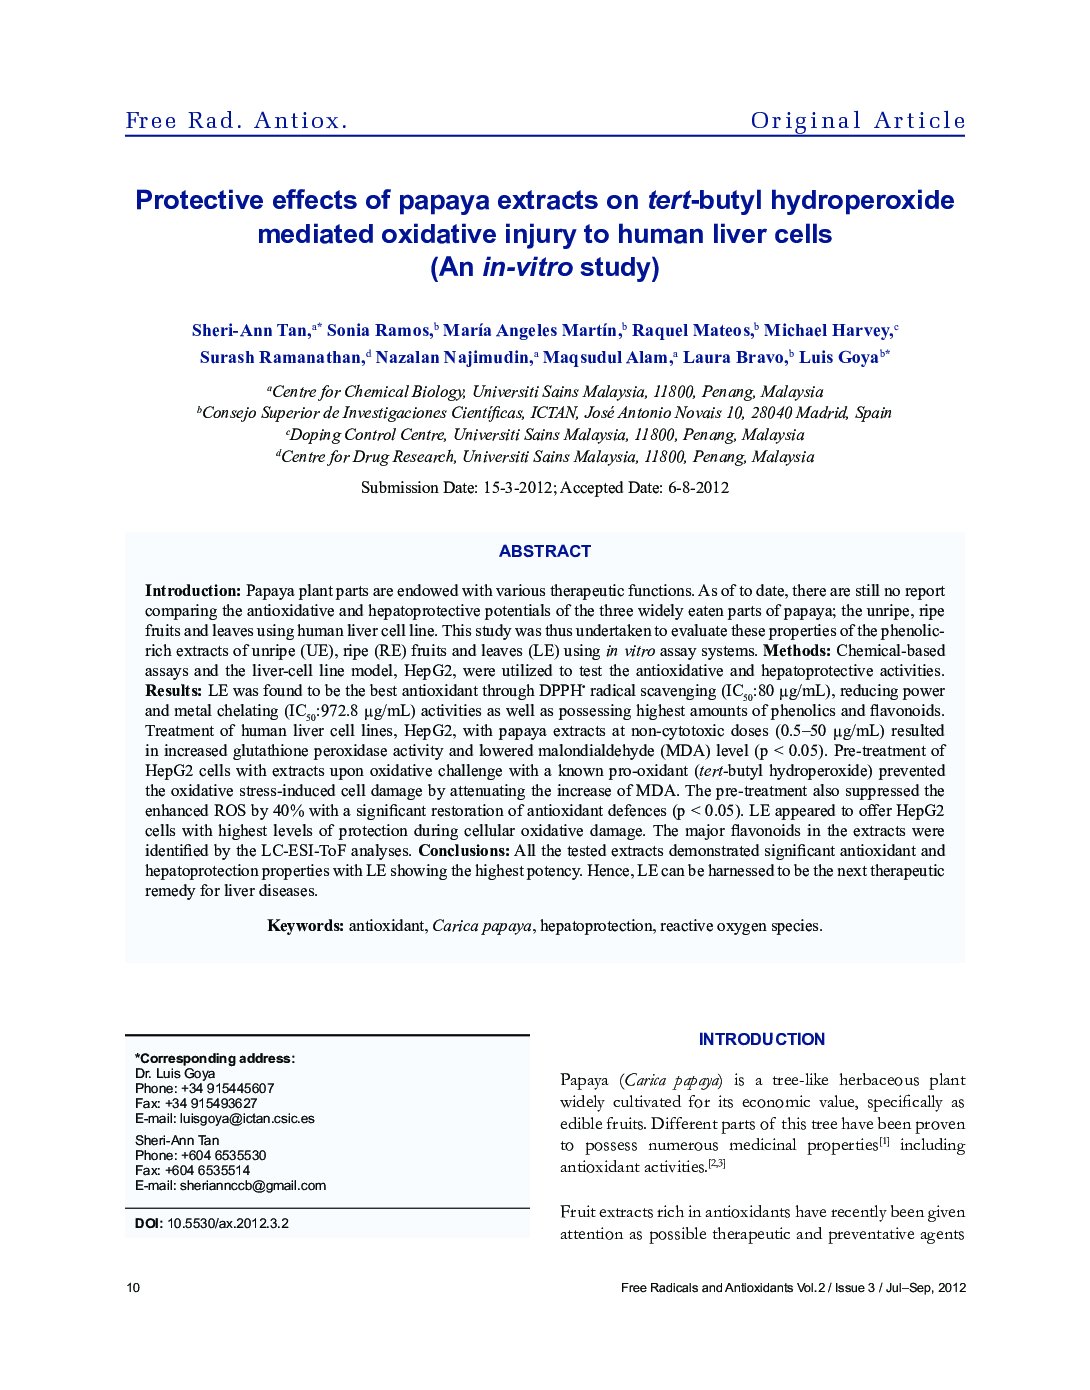 Protective effects of papaya extracts on tert-butyl hydroperoxide mediated oxidative injury to human liver cells (An in-vitro study)